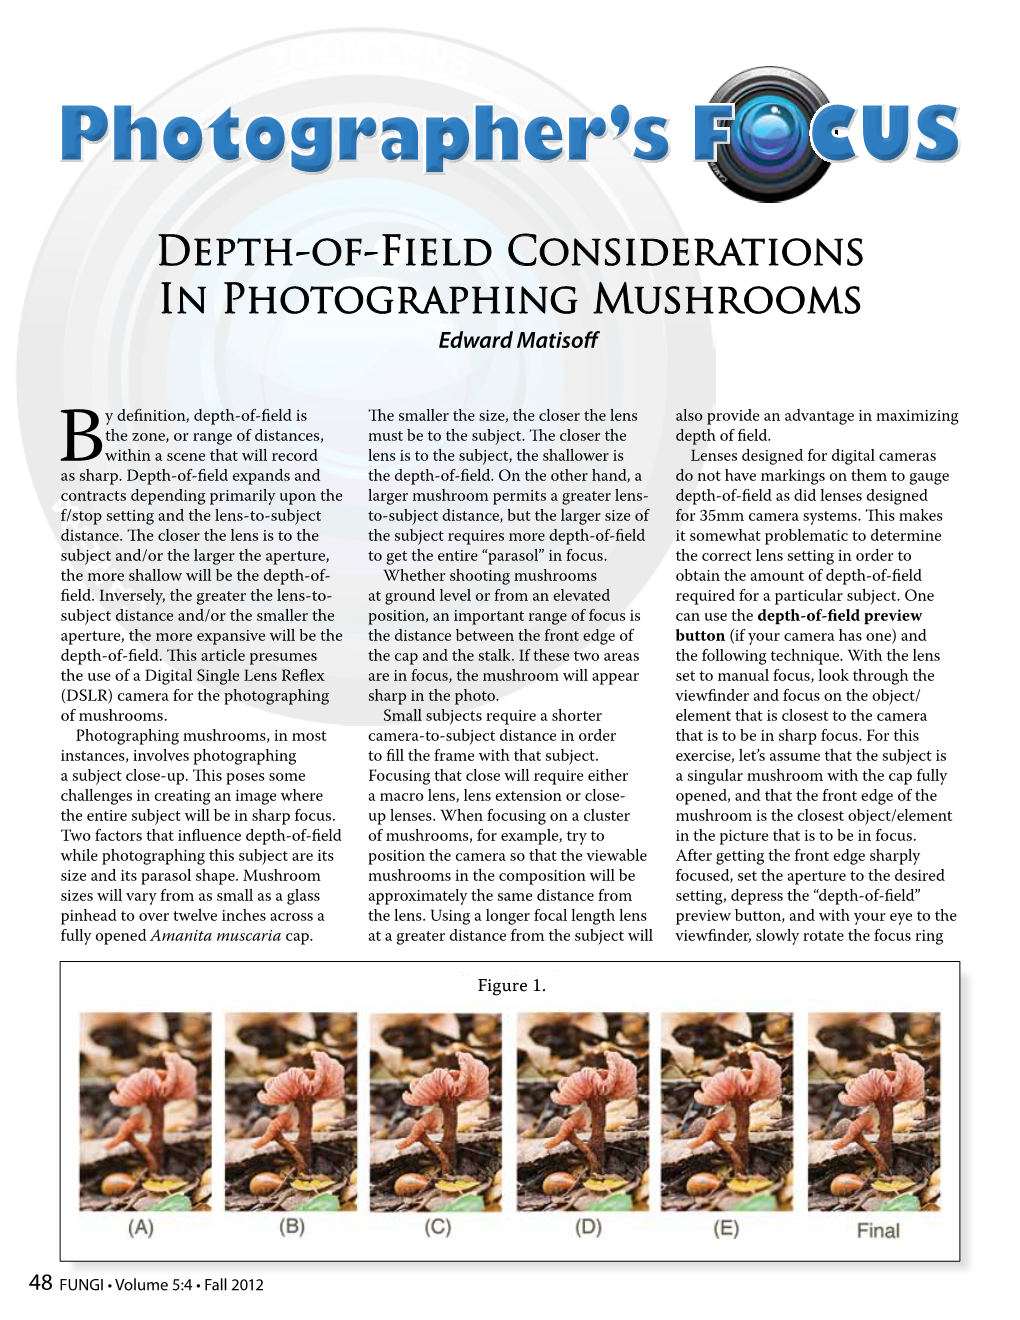 Depth-Of-Field Considerations in Photographing Mushrooms Edward Matisoff